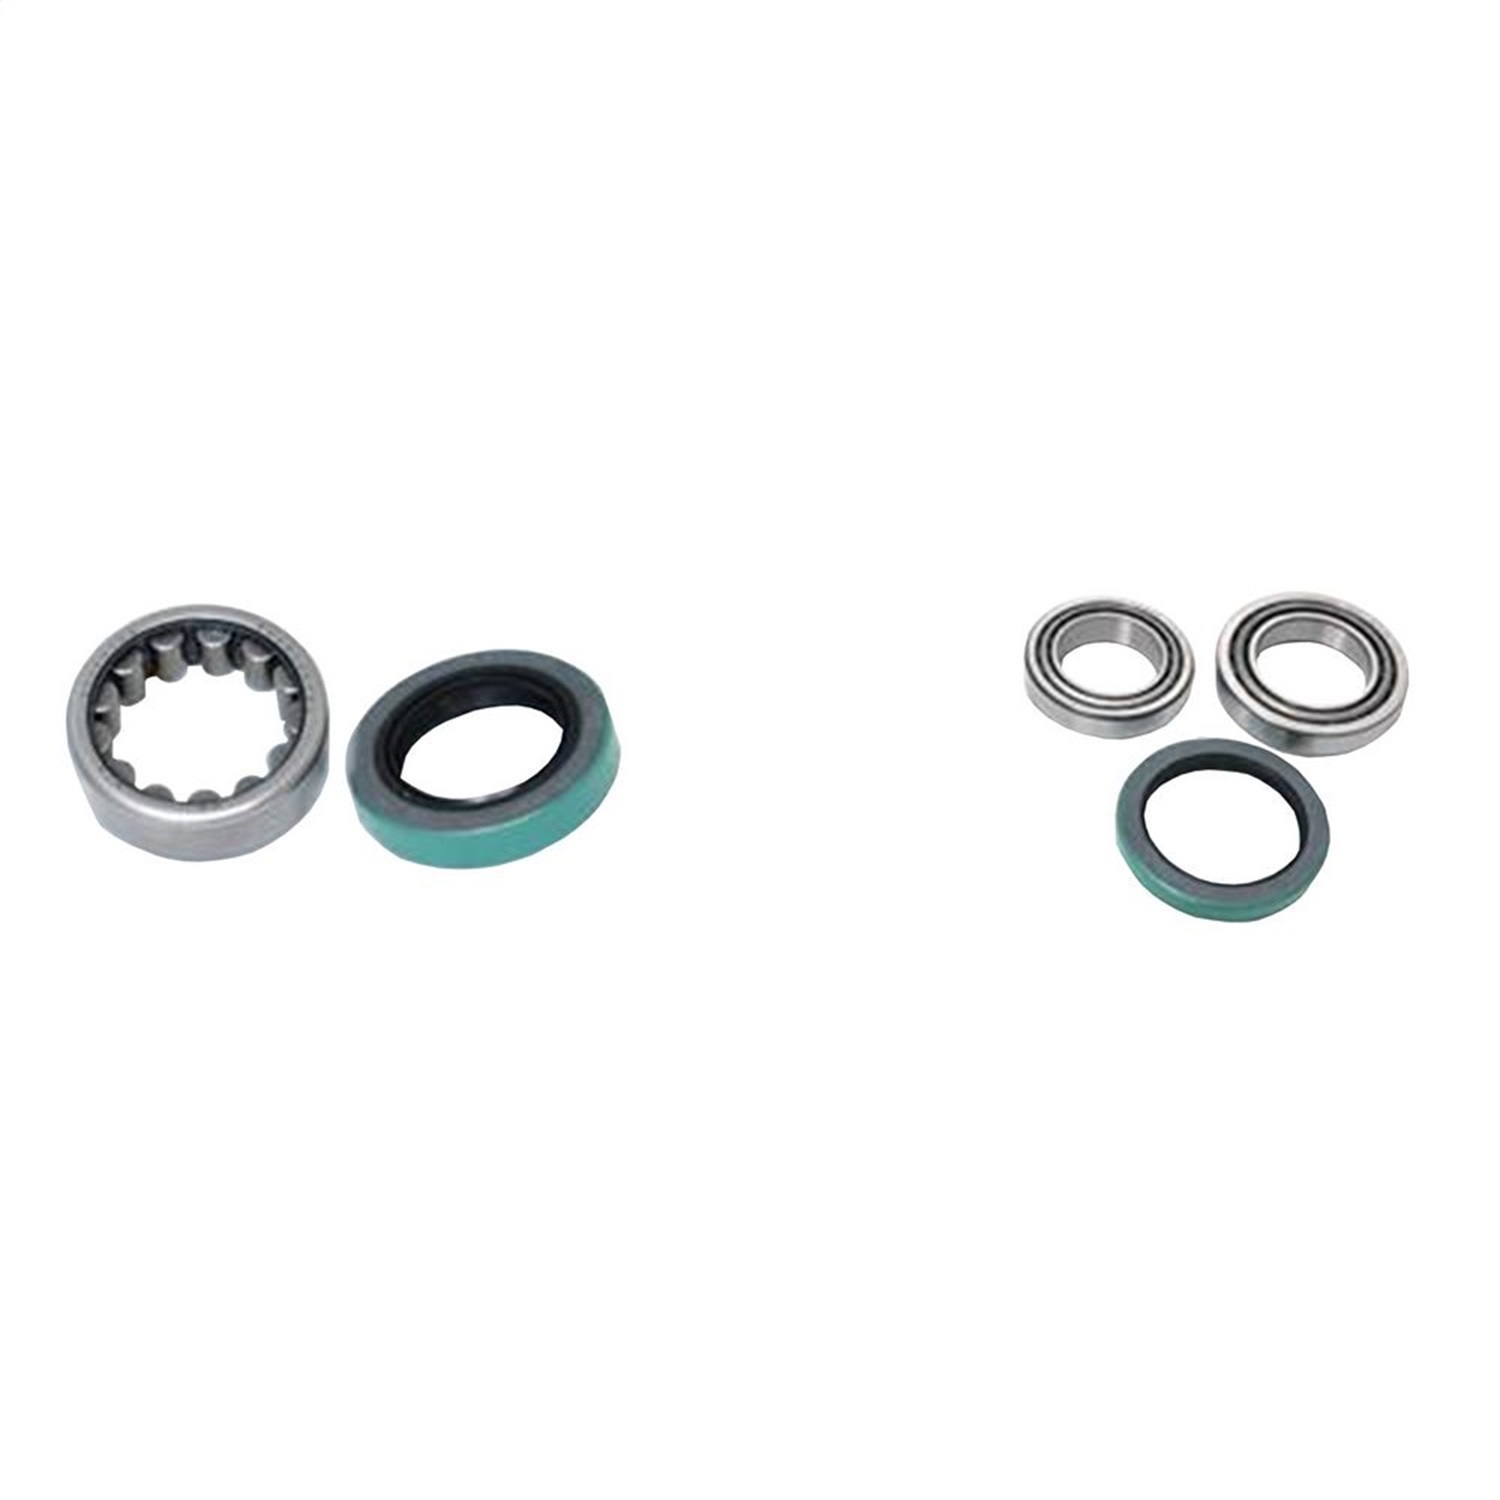 G2 Axle and Gear G2 Axle and Gear 30-8006 Wheel Bearing Kit